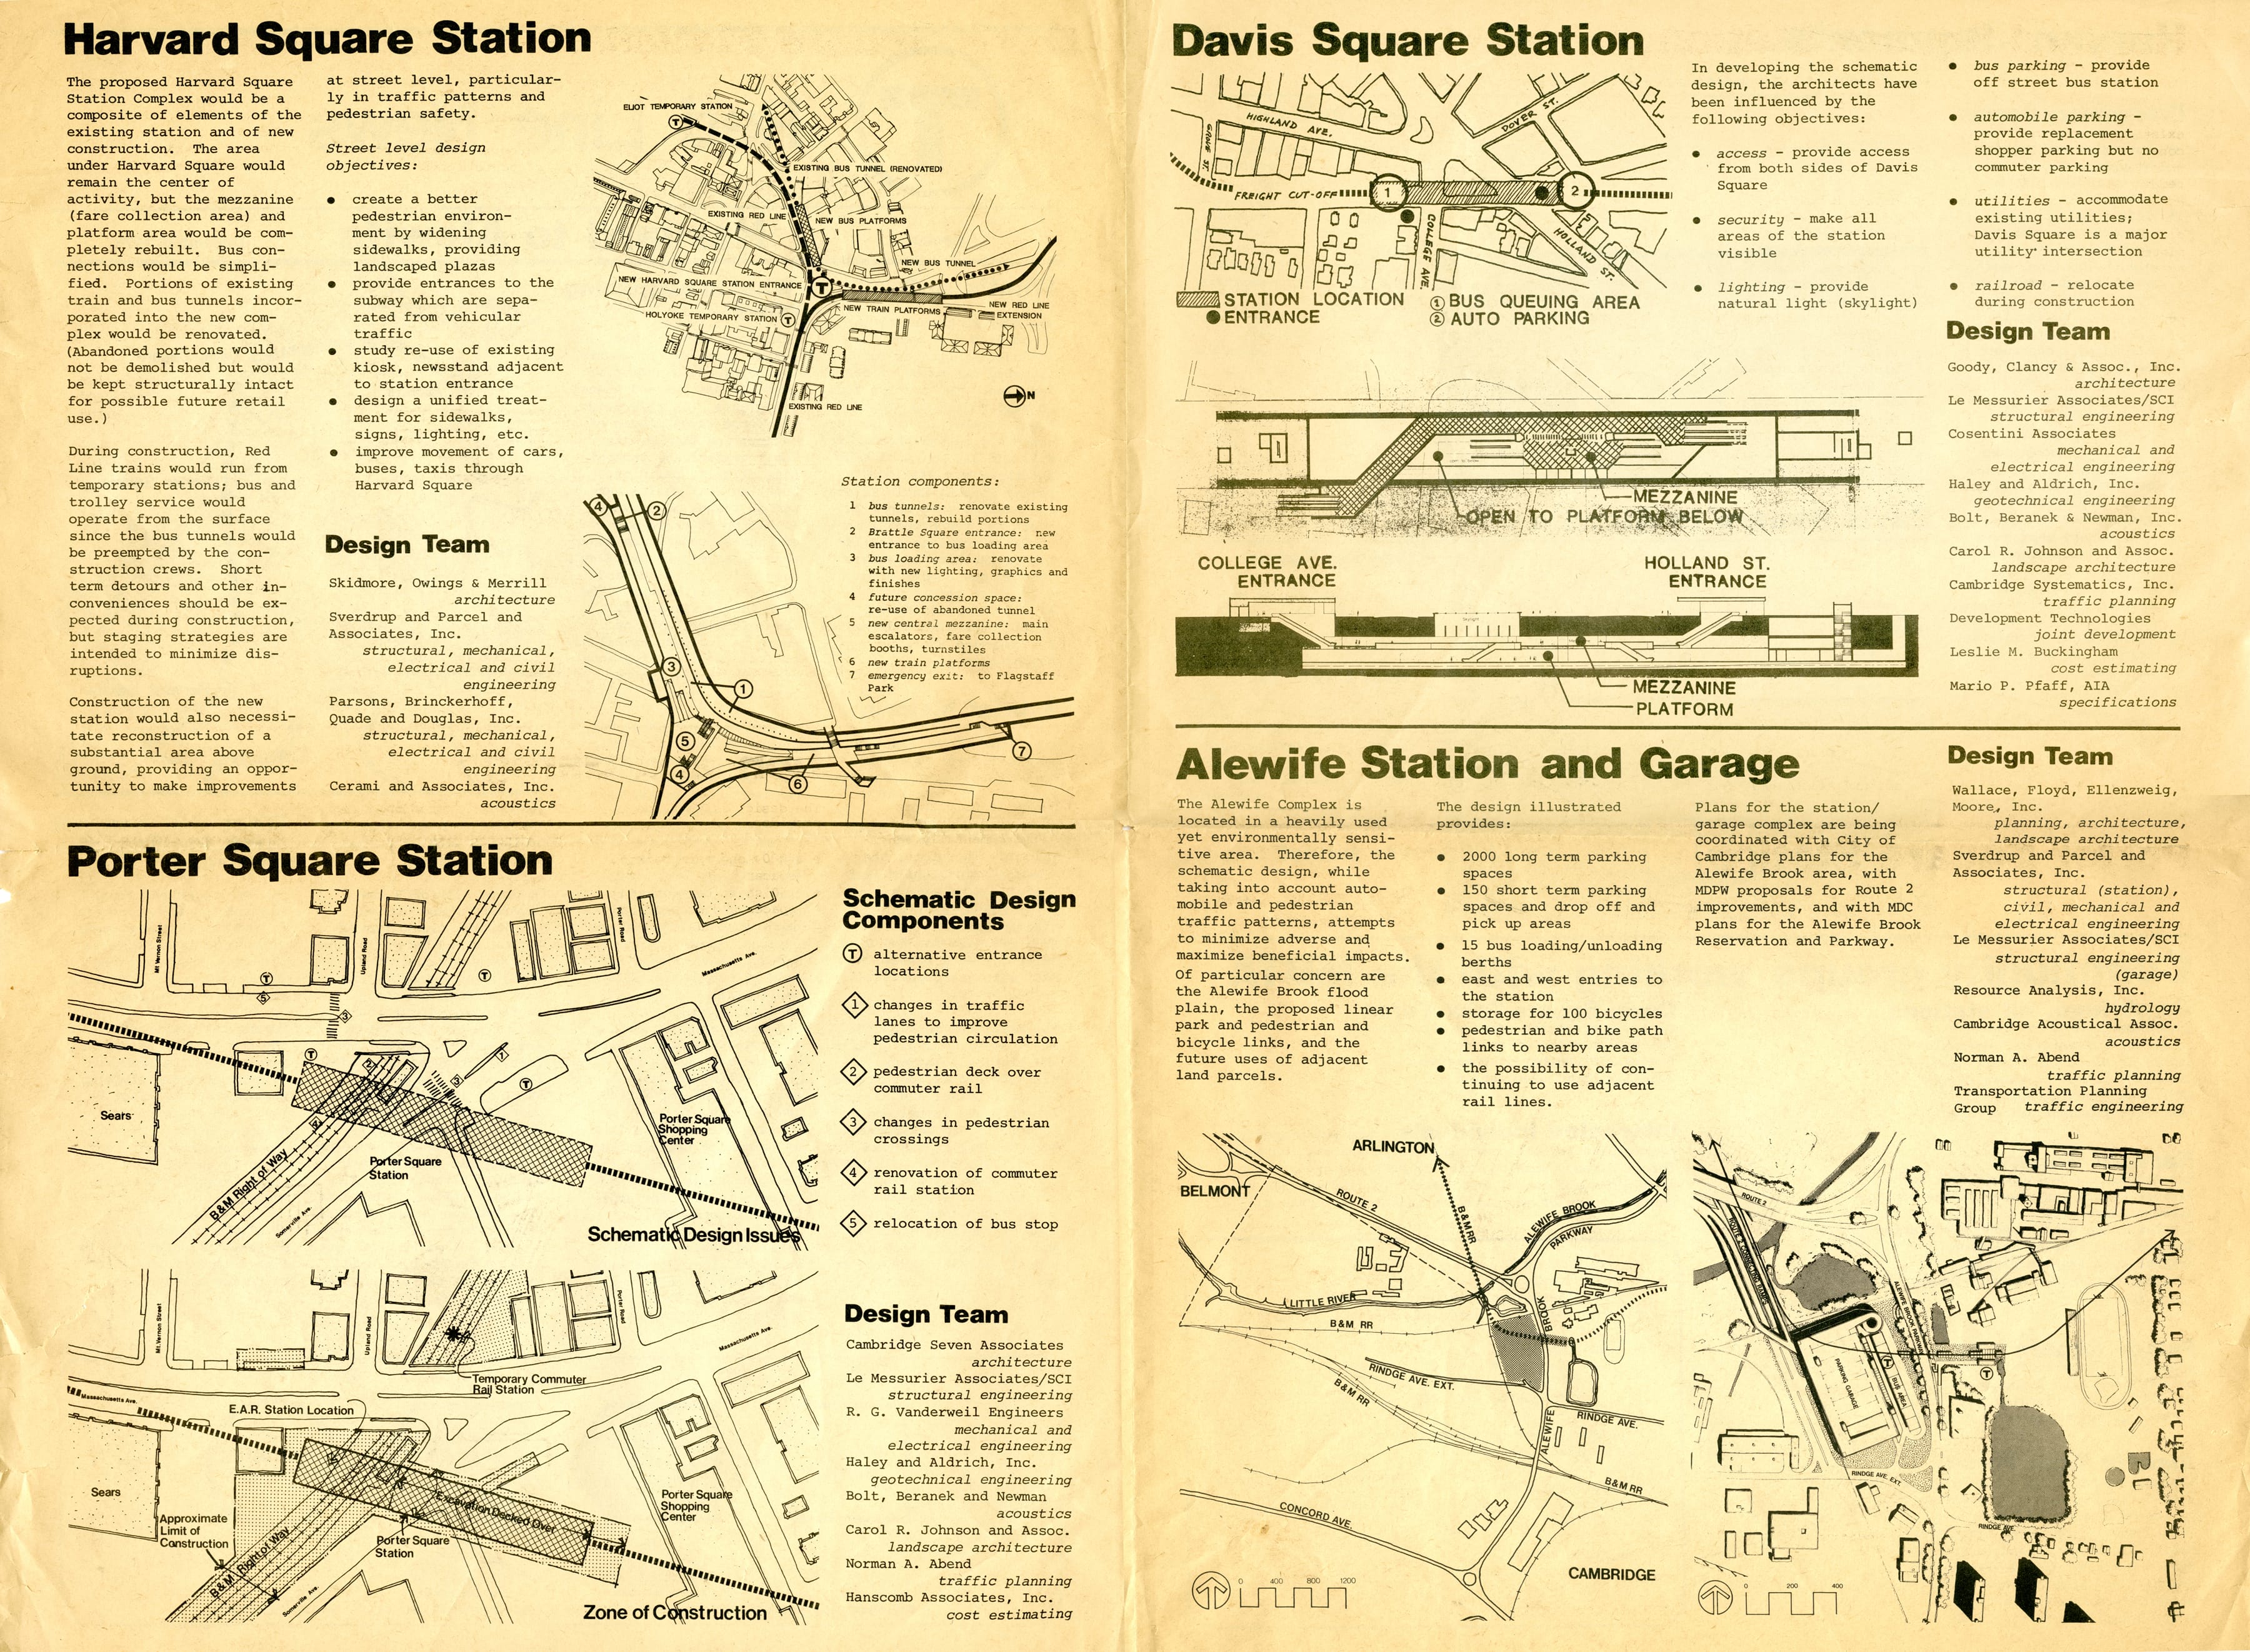 Image of “Proposed Stations of the Northwest Extension” from “Red Line News,” no. 1